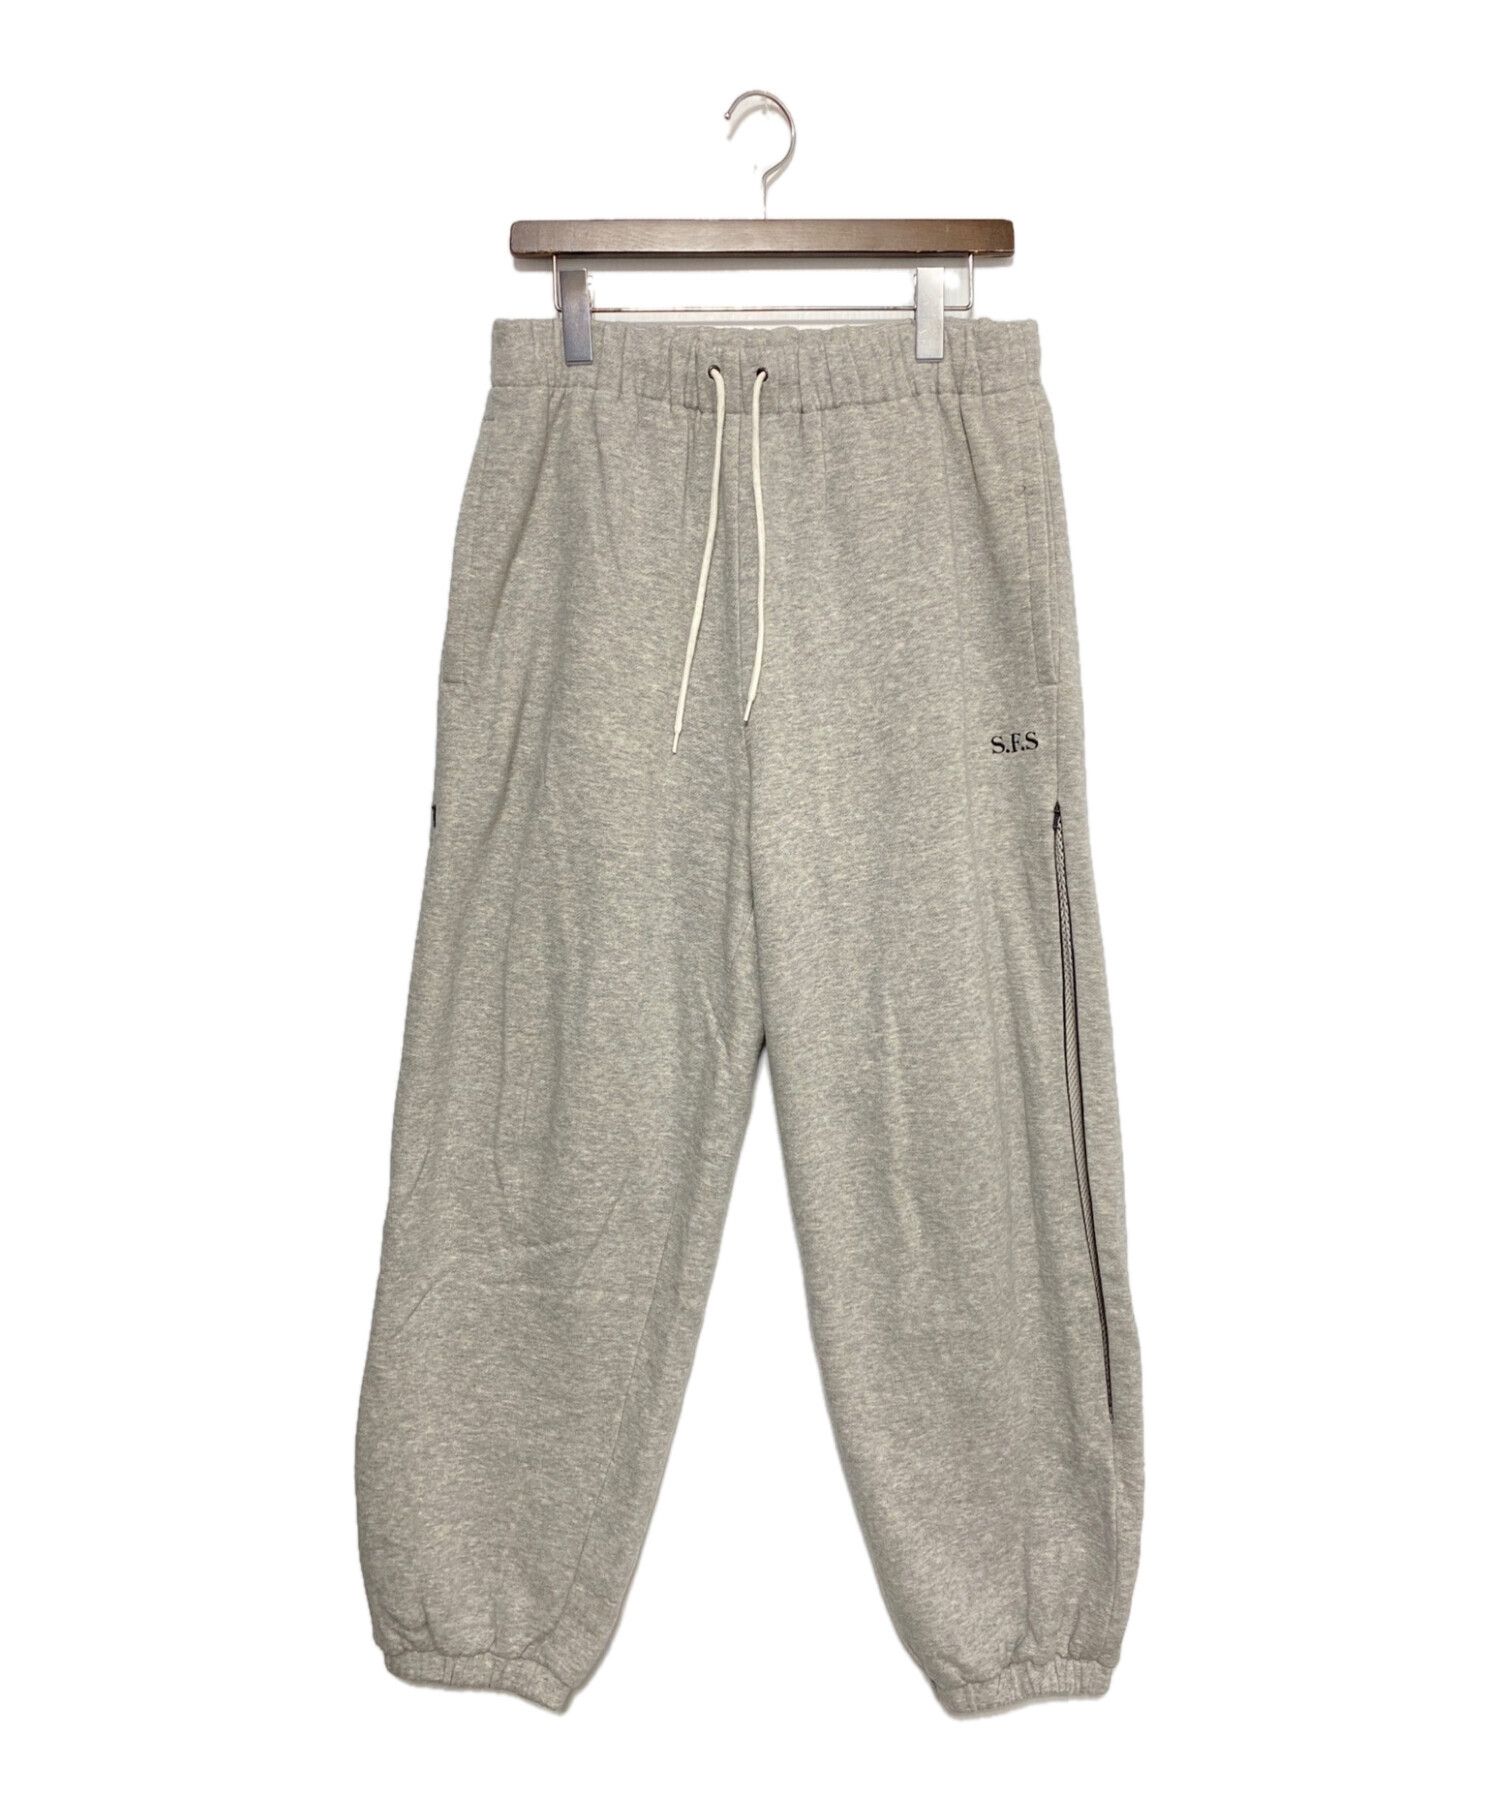 private brand by S.F.S fleece pants | misspockets3.com